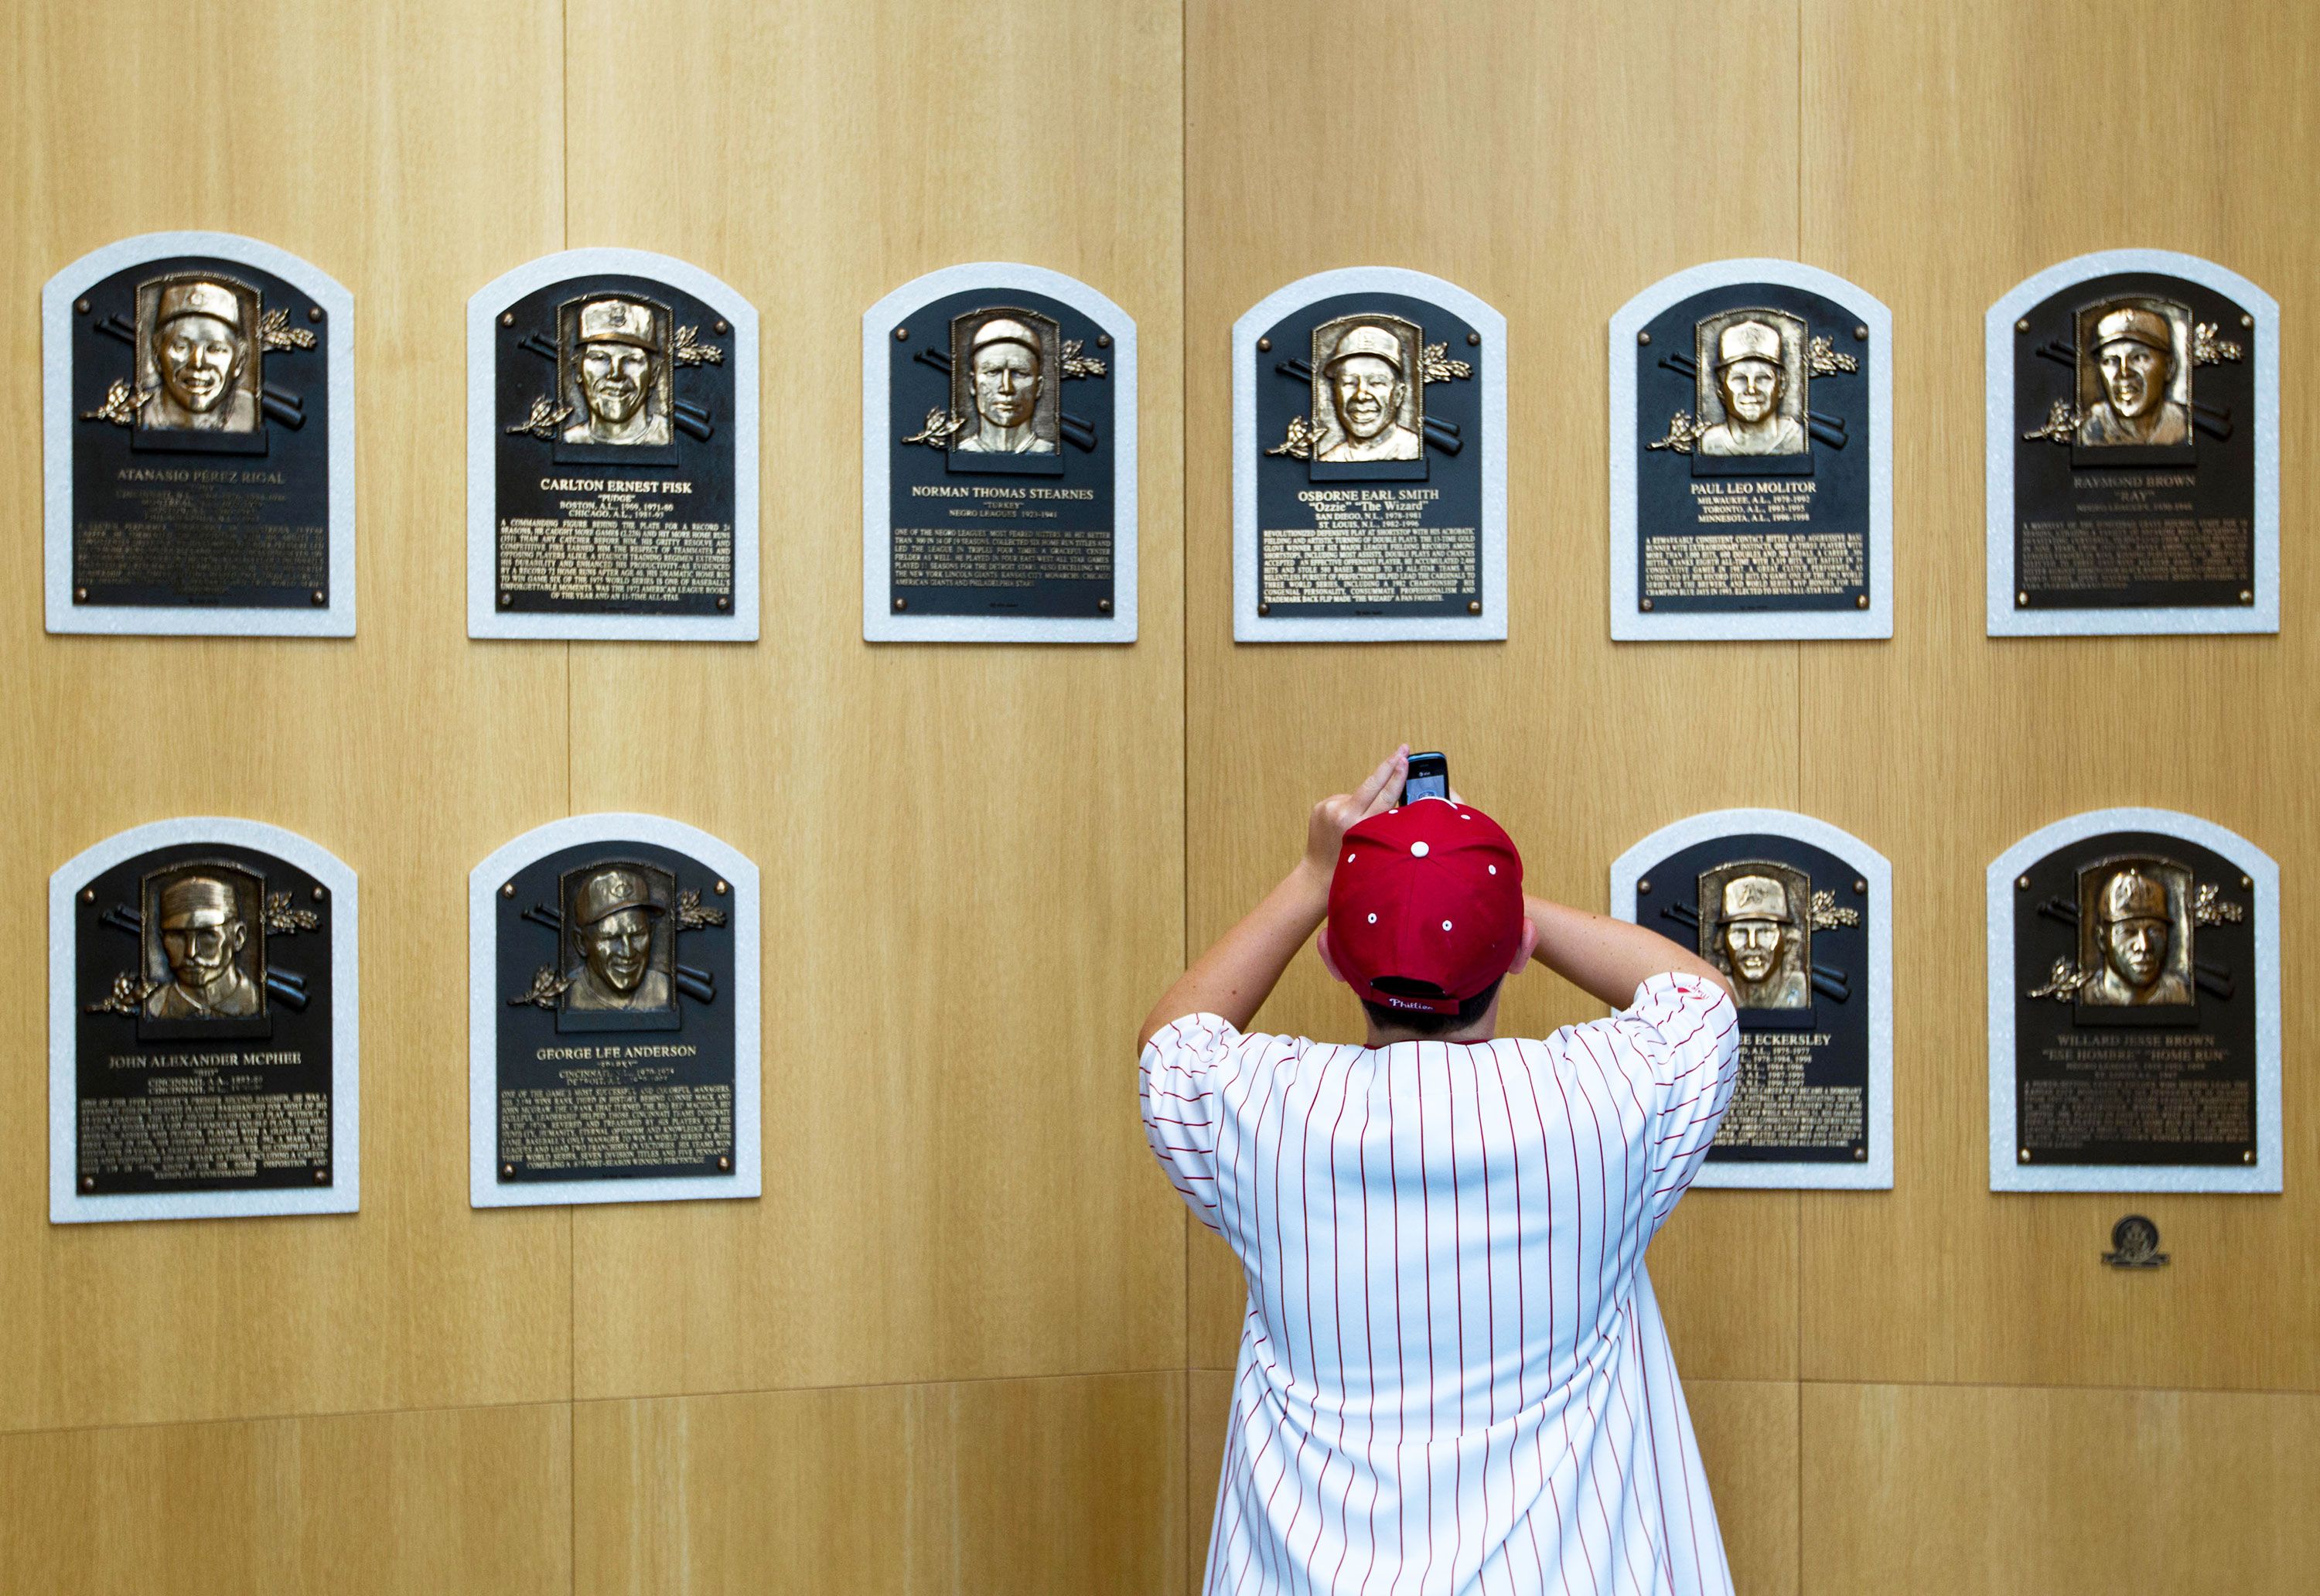 Something's Still Not Right at the Baseball Hall of Fame